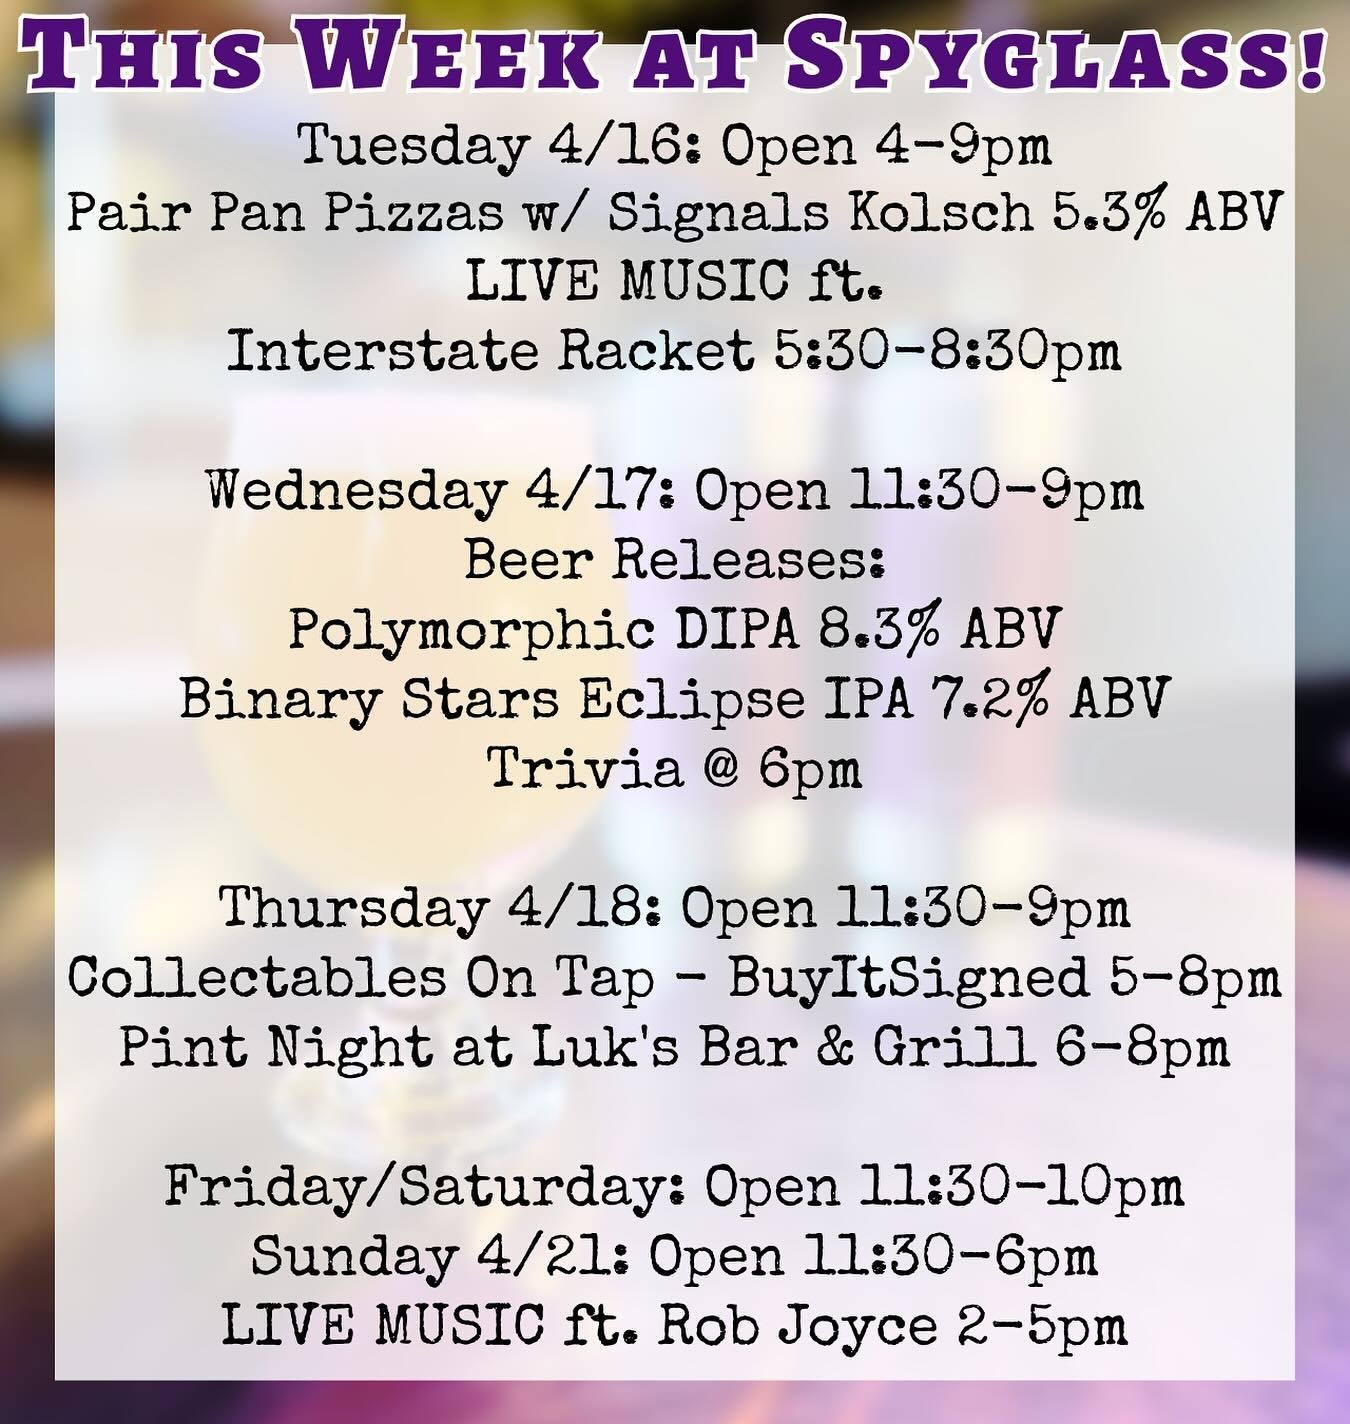 This Week at Spyglass!

Tuesday Open 4-9pm 
🍕Chef Special Pizza - Chorizo taco pizza with house Chorizo, corn, roasted tomato salsa, avocado, crushed tortilla chips &amp; scallion.

🍻 This weeks Beer Releases 🍻
Signals Kolsch 5.3% ABV
Polymorphic 